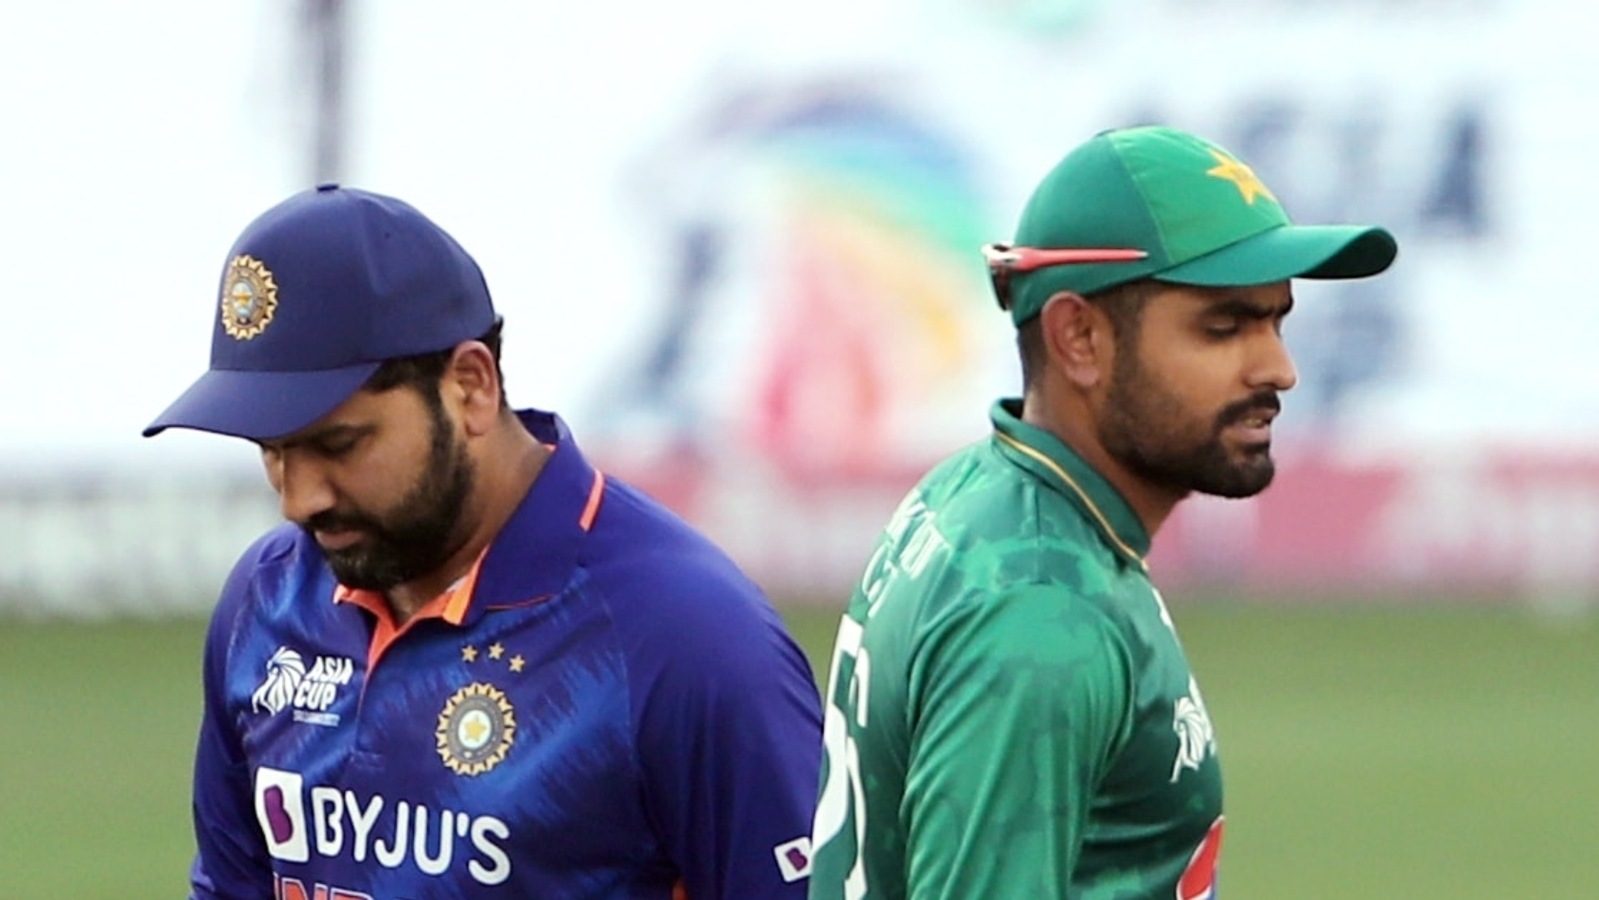 india-vs-pakistan-t20-world-cup-weather-forecast-90-percent-rainfall-expected-during-ind-vs-pak-tie-in-melbourne